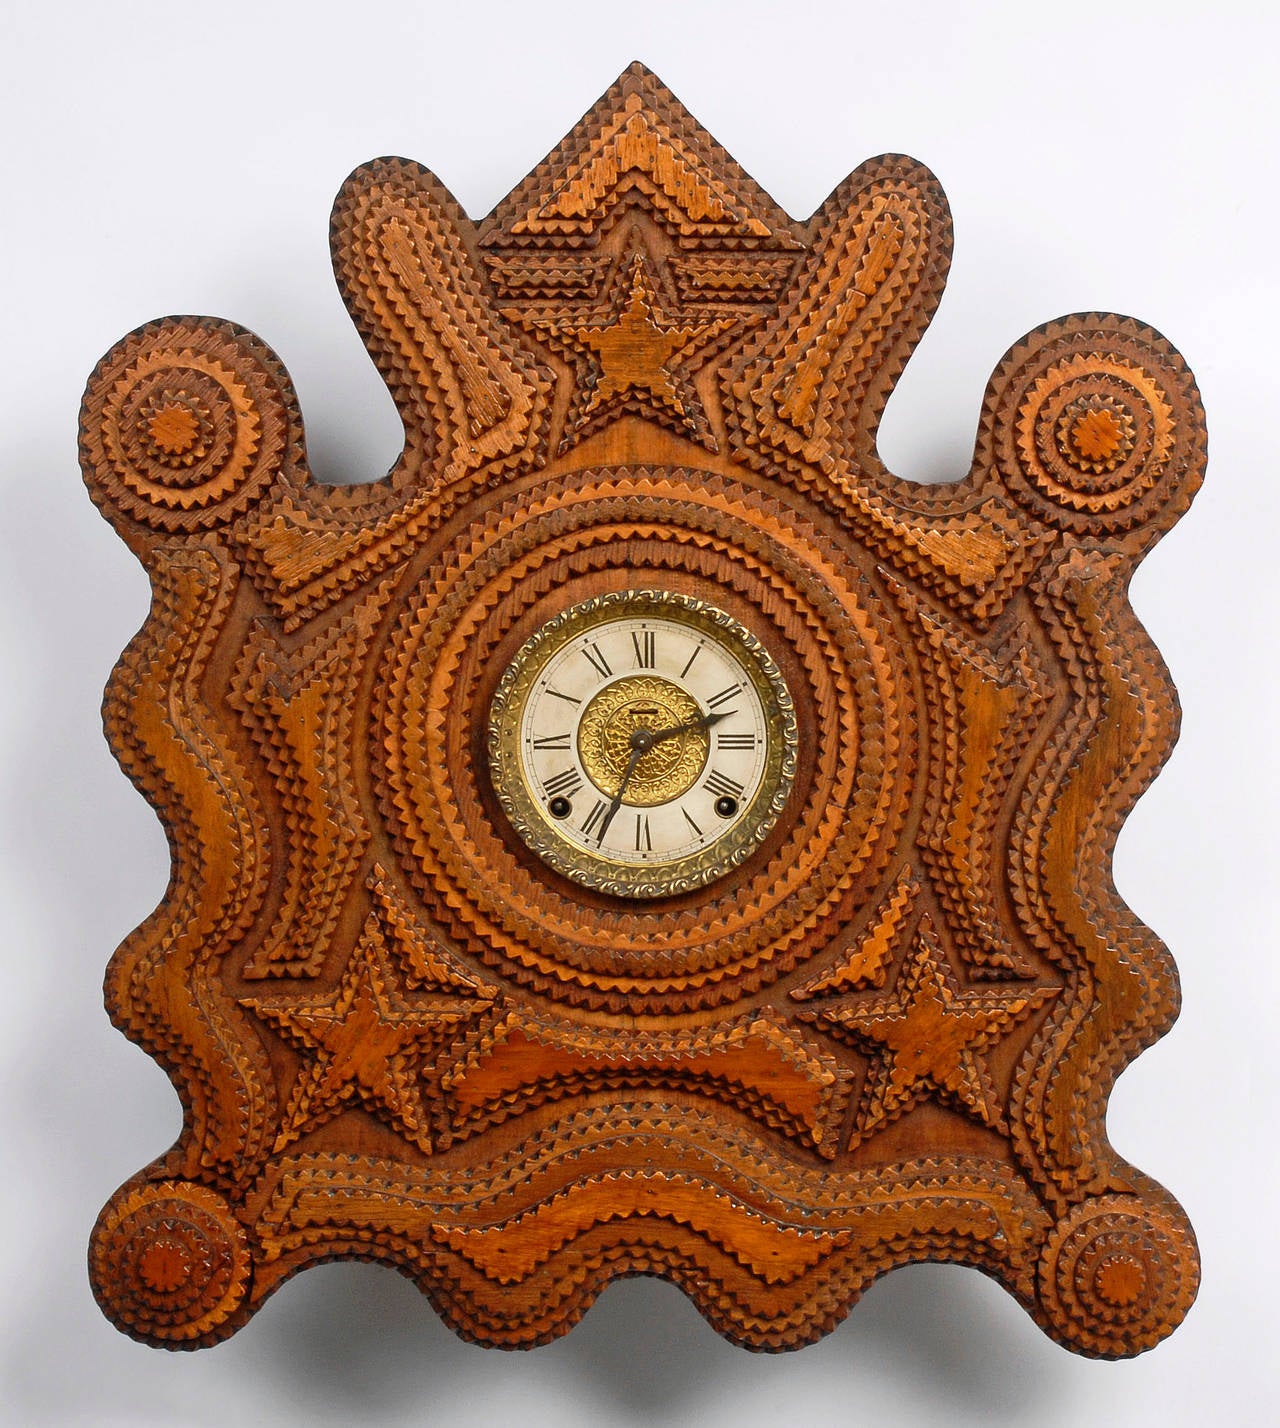 A wonderful and visually striking tramp wall clock with a fluid shape and embellished with stars and rosettes. This clock was illustrated in, Tramp Art a Folk Art Phenomenon, on page 133. It was also exhibited in a Tramp Art show at the Intuit